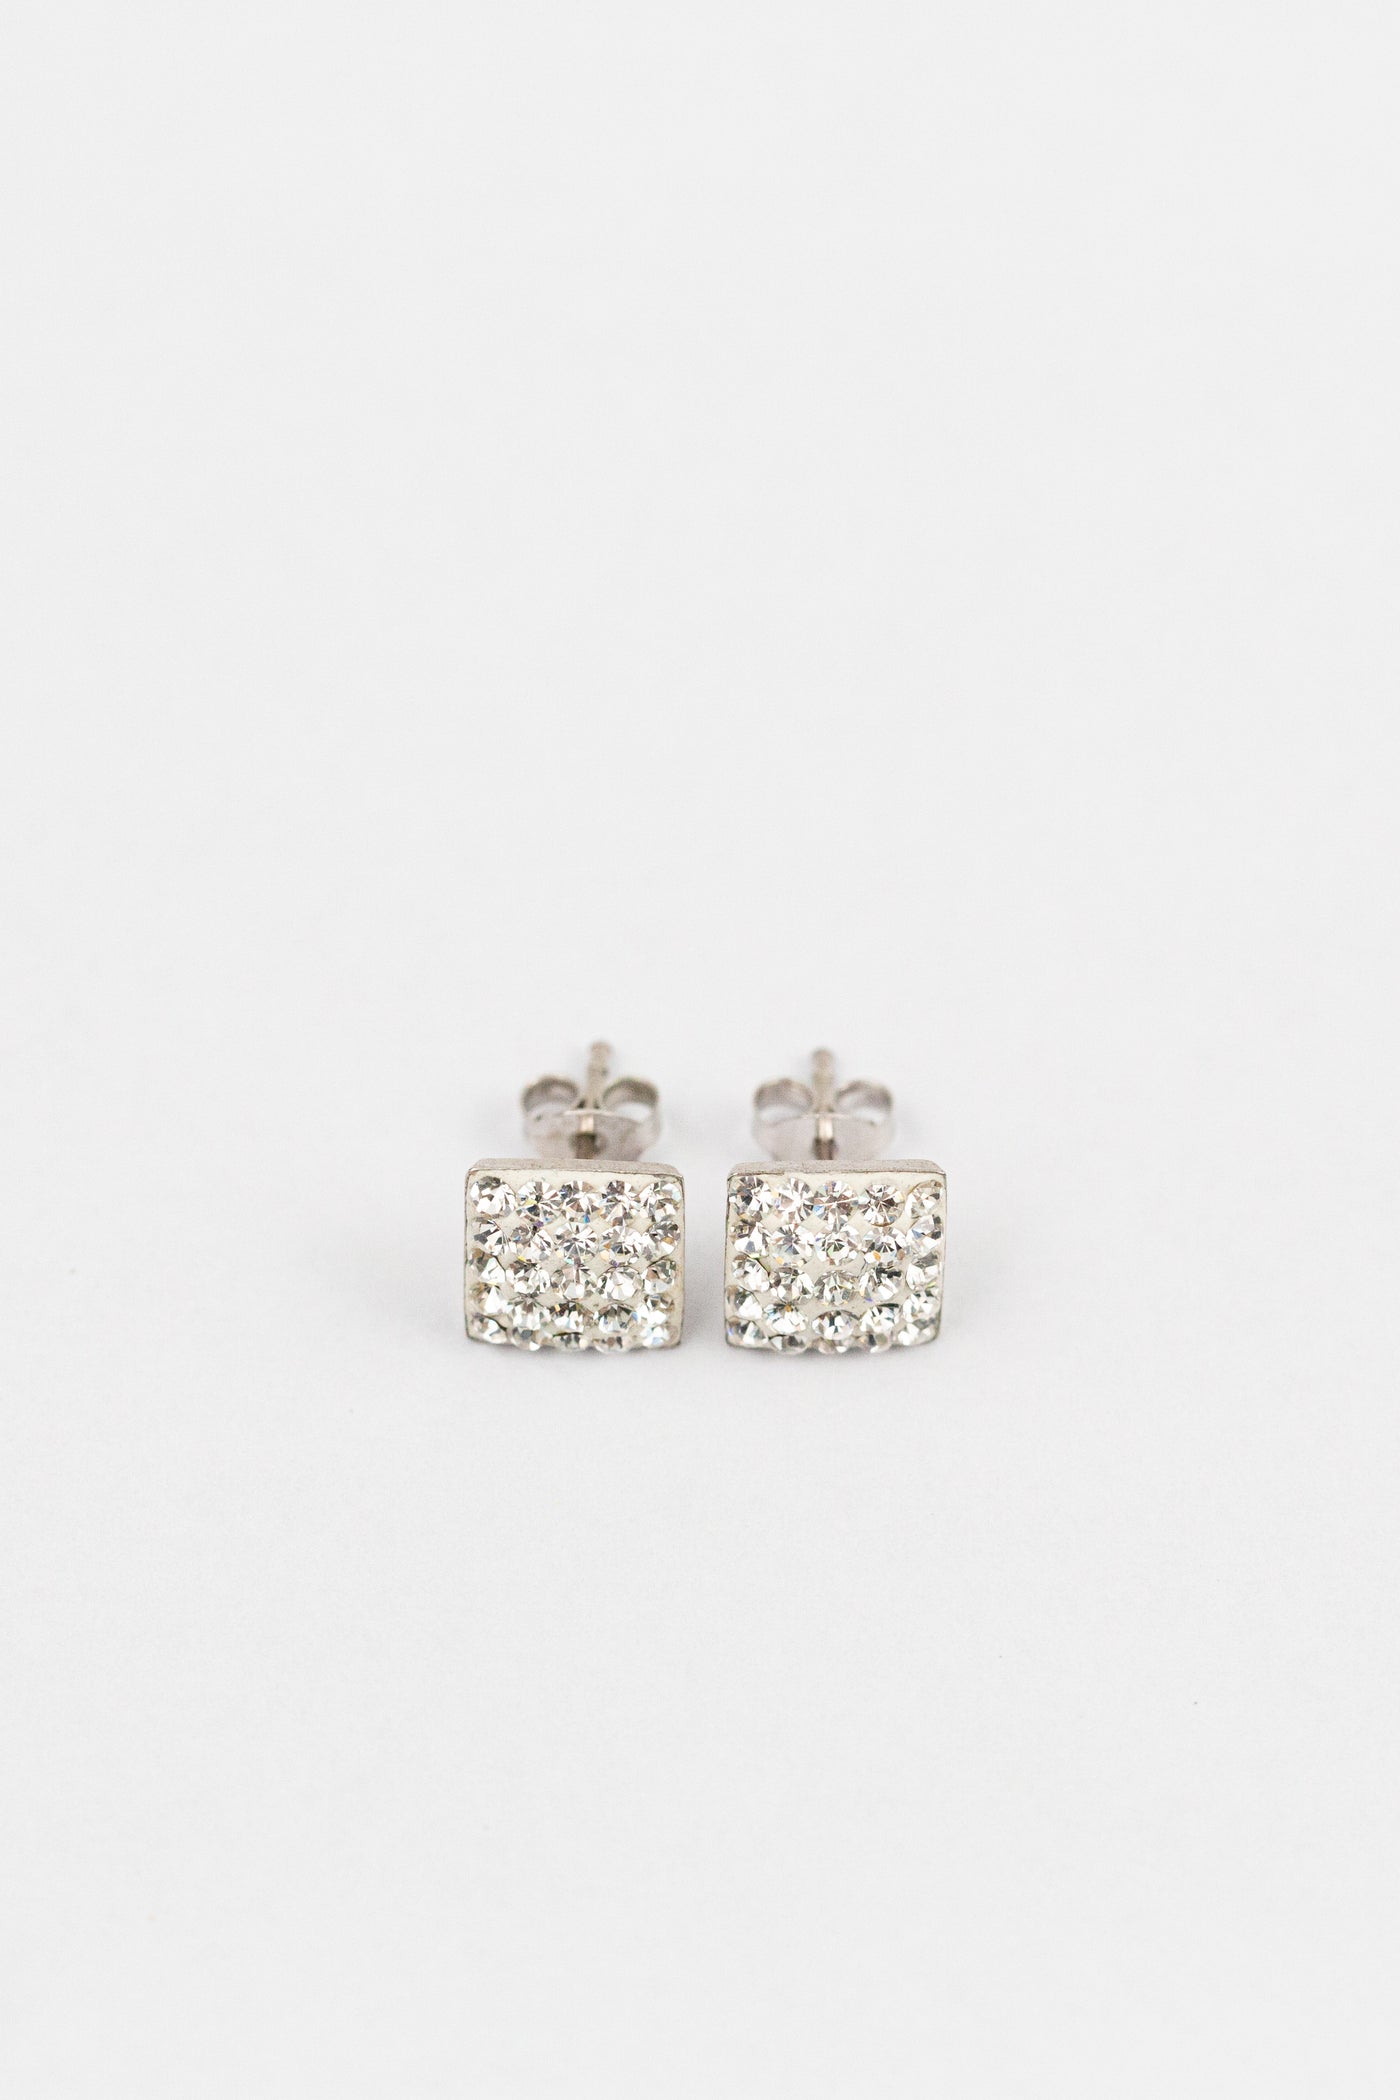 Crystal Square Pave Stud Sterling Silver Earrings | Annie and Sisters | sister stud earrings, for kids, children's jewelry, kid's jewelry, best friend